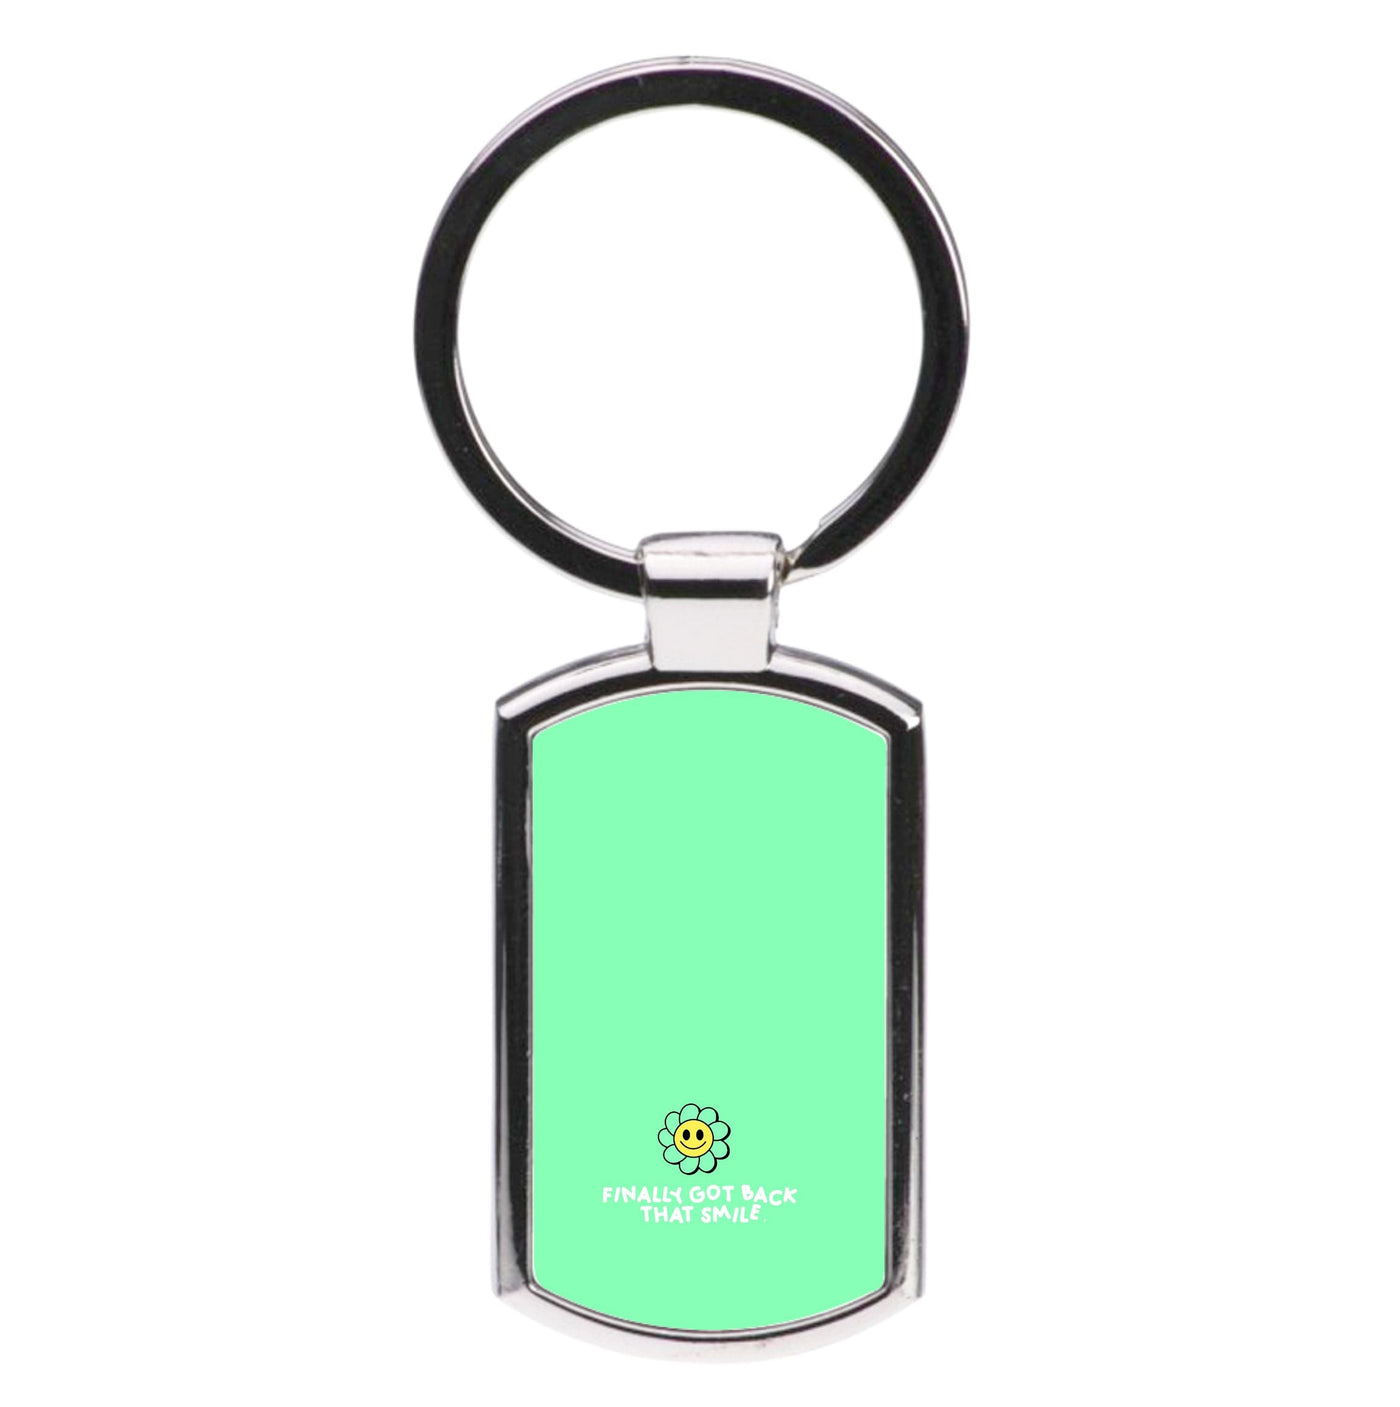 Finally Got Back That Smile - Katy Perry Luxury Keyring